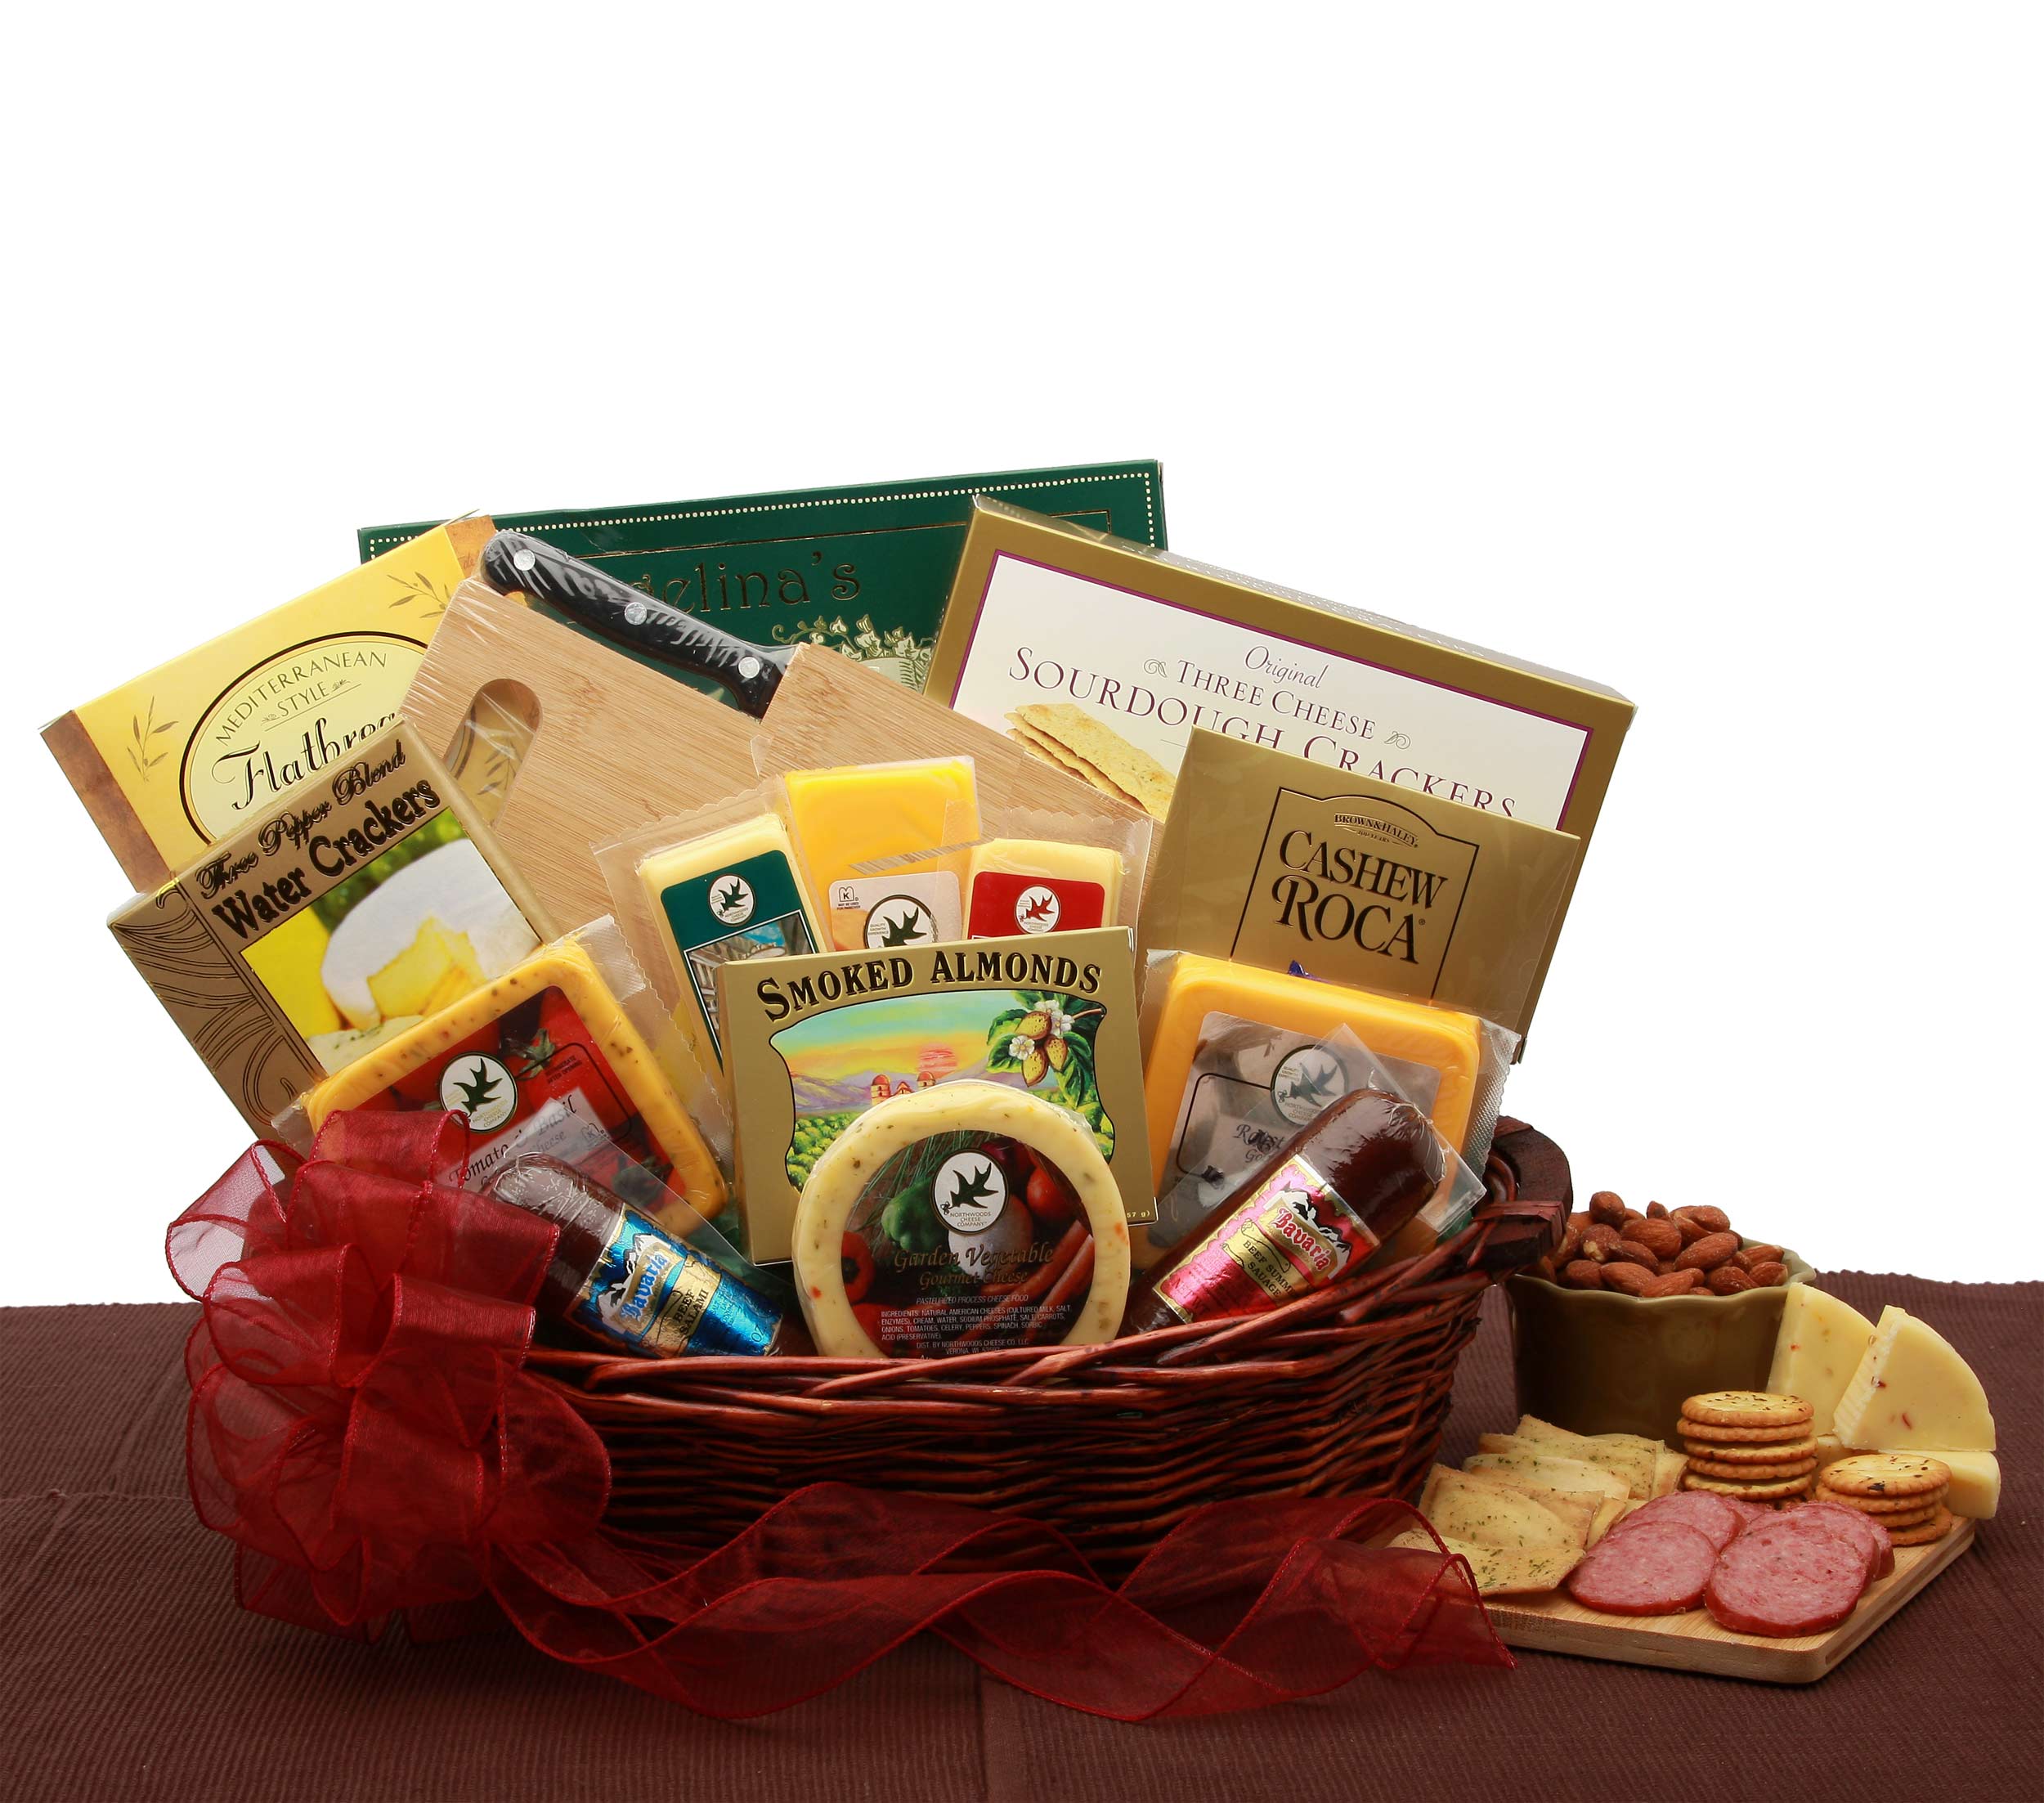 Meat & Cheese Wooden Gift Crate - Sympathy Gift Baskets